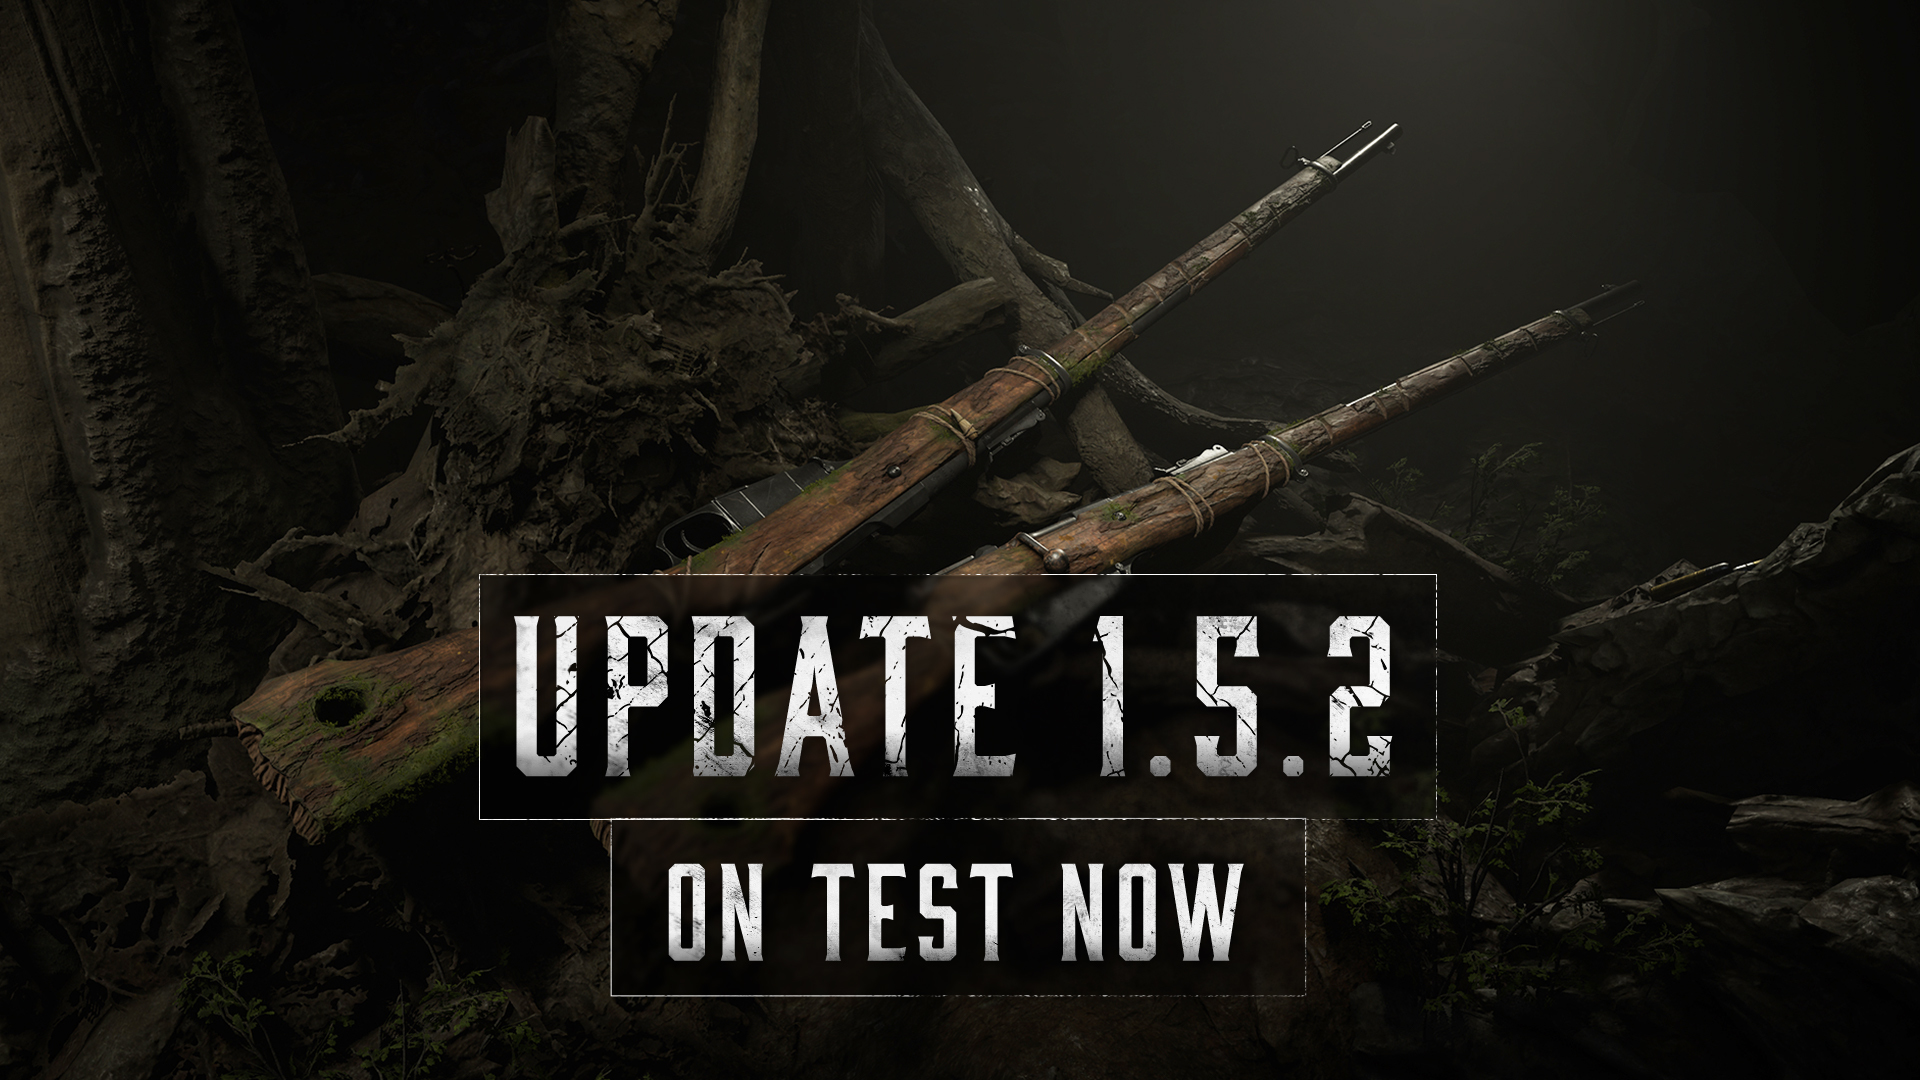 Hunt: Showdown - Test Server is now Live with Update 1.5.2 - Steam News